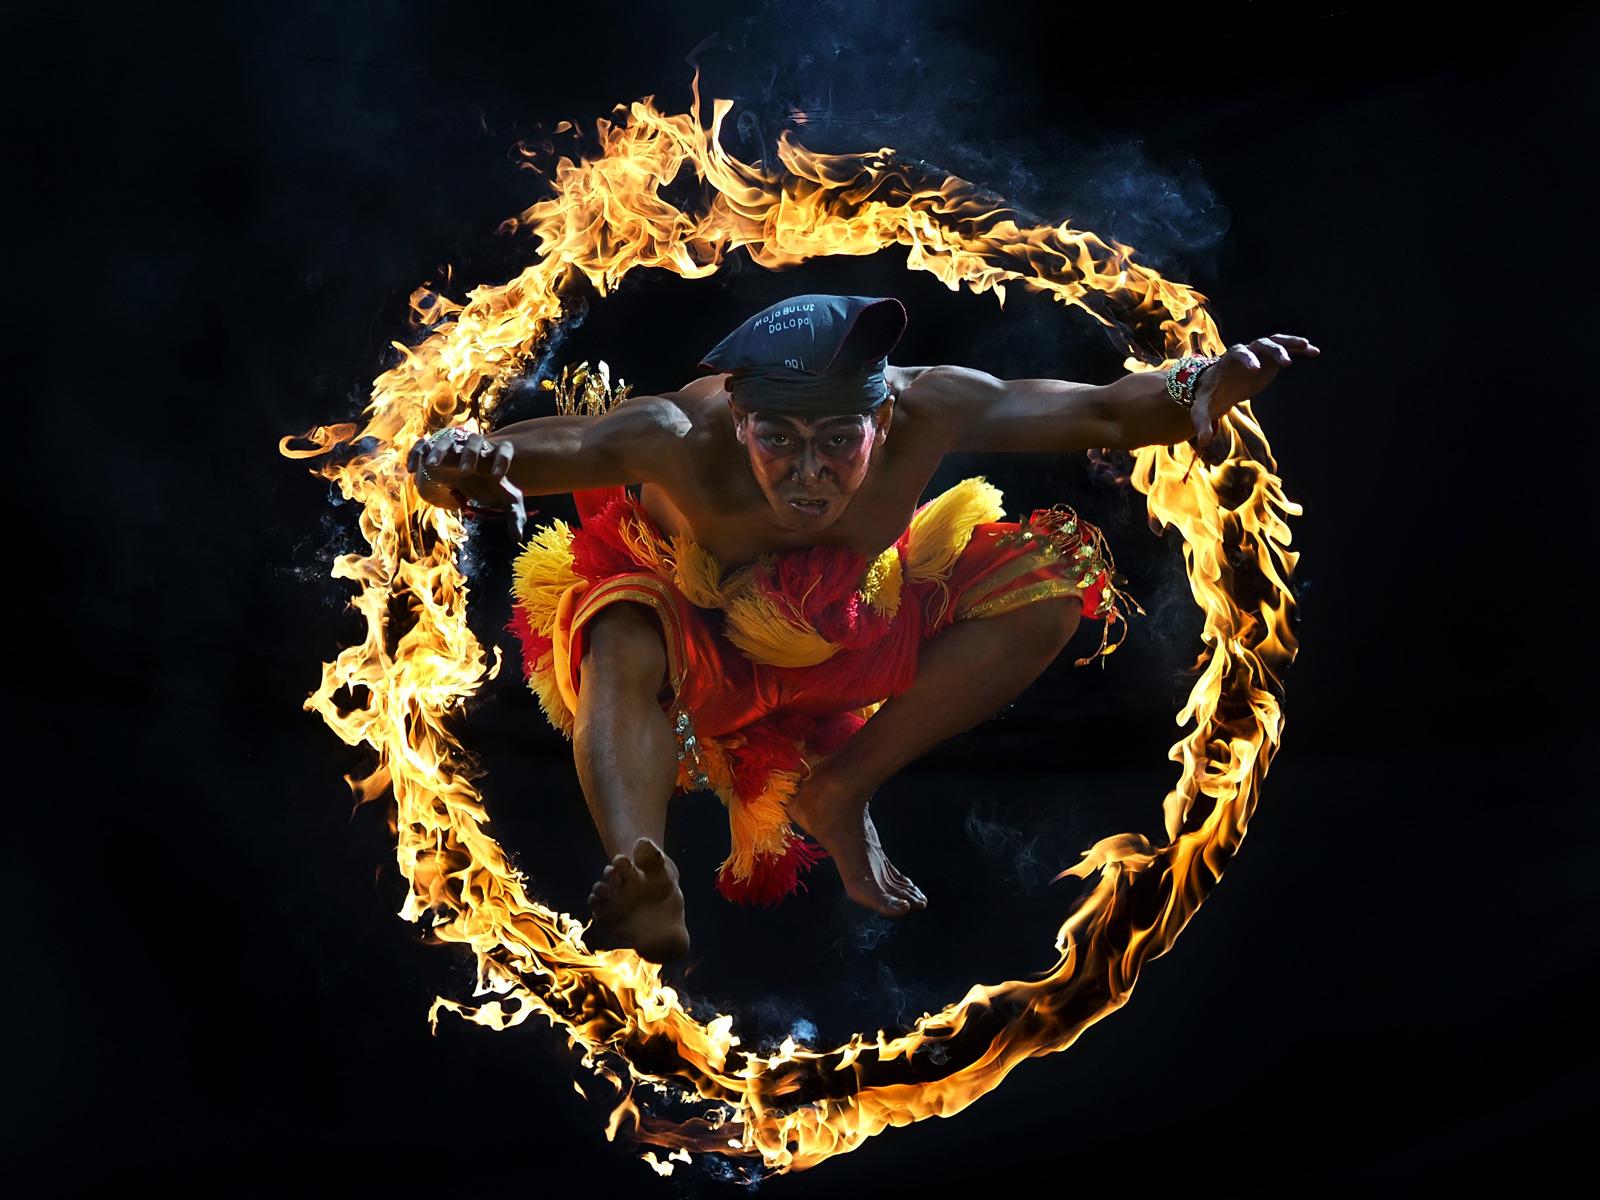 One of traditional attraction in Indonesia Culture called Bujang Ganong. He jumped into the circle of fire. Foto: Aprison Aprison, Indonesia, Shortlist, Arts&Culture, Open, 2015 Sony World Photography Awards